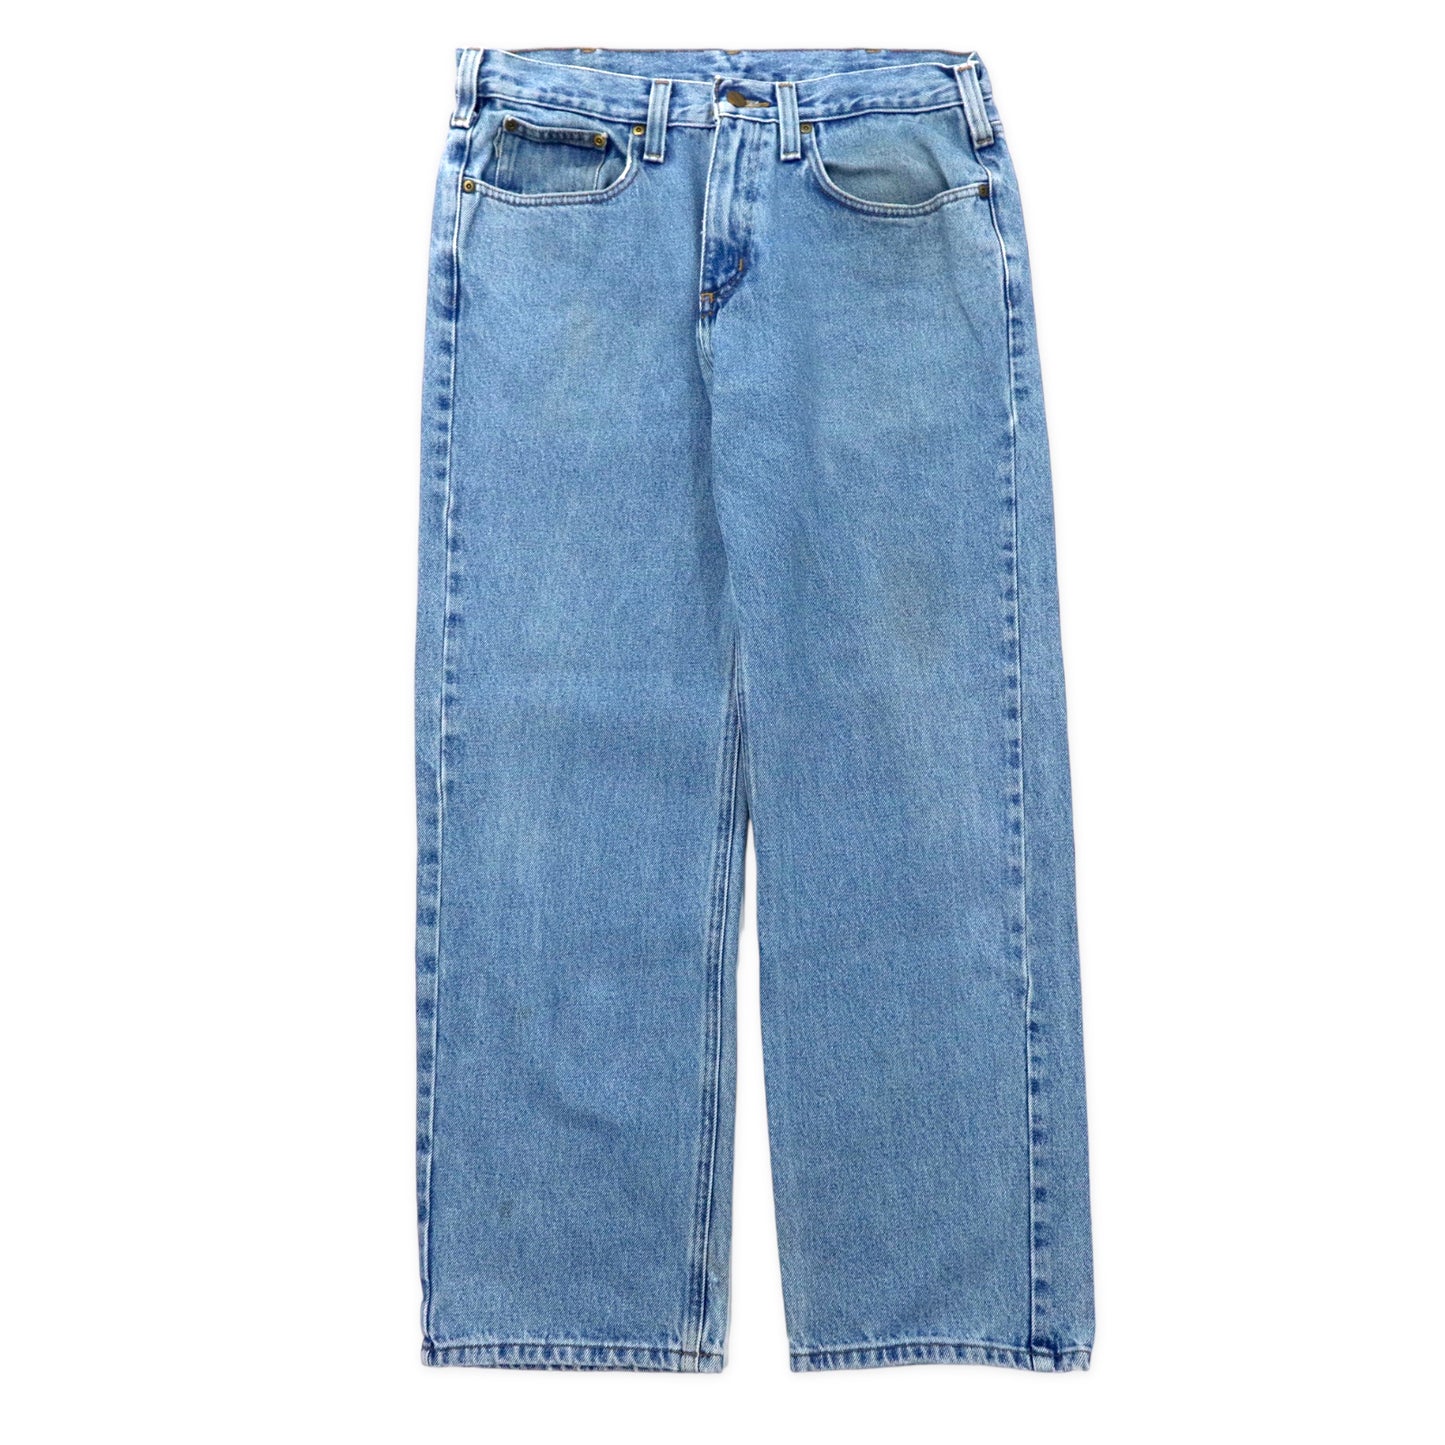 CARHARTT Buggy Tapered Denim PANTS 34 Blue Ice Wash RELAXED FIT ...